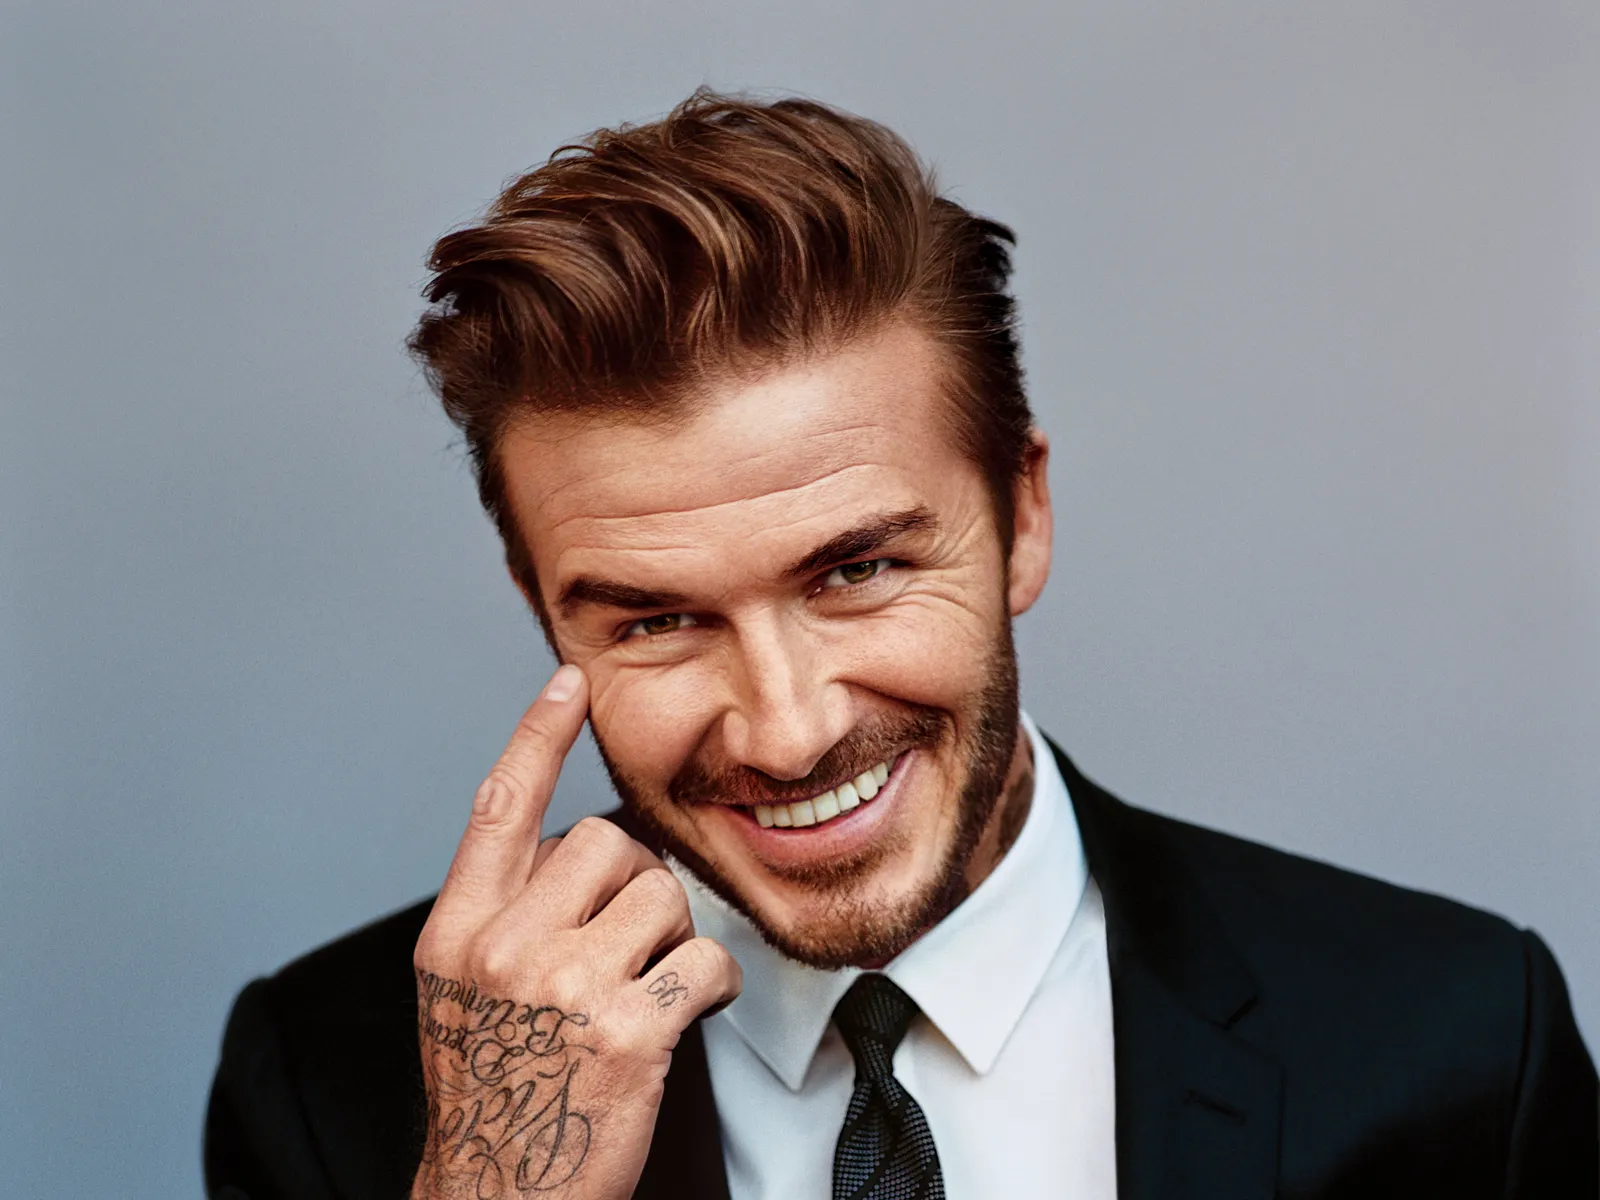 Know David Beckham's Net Worth, Career, and More!